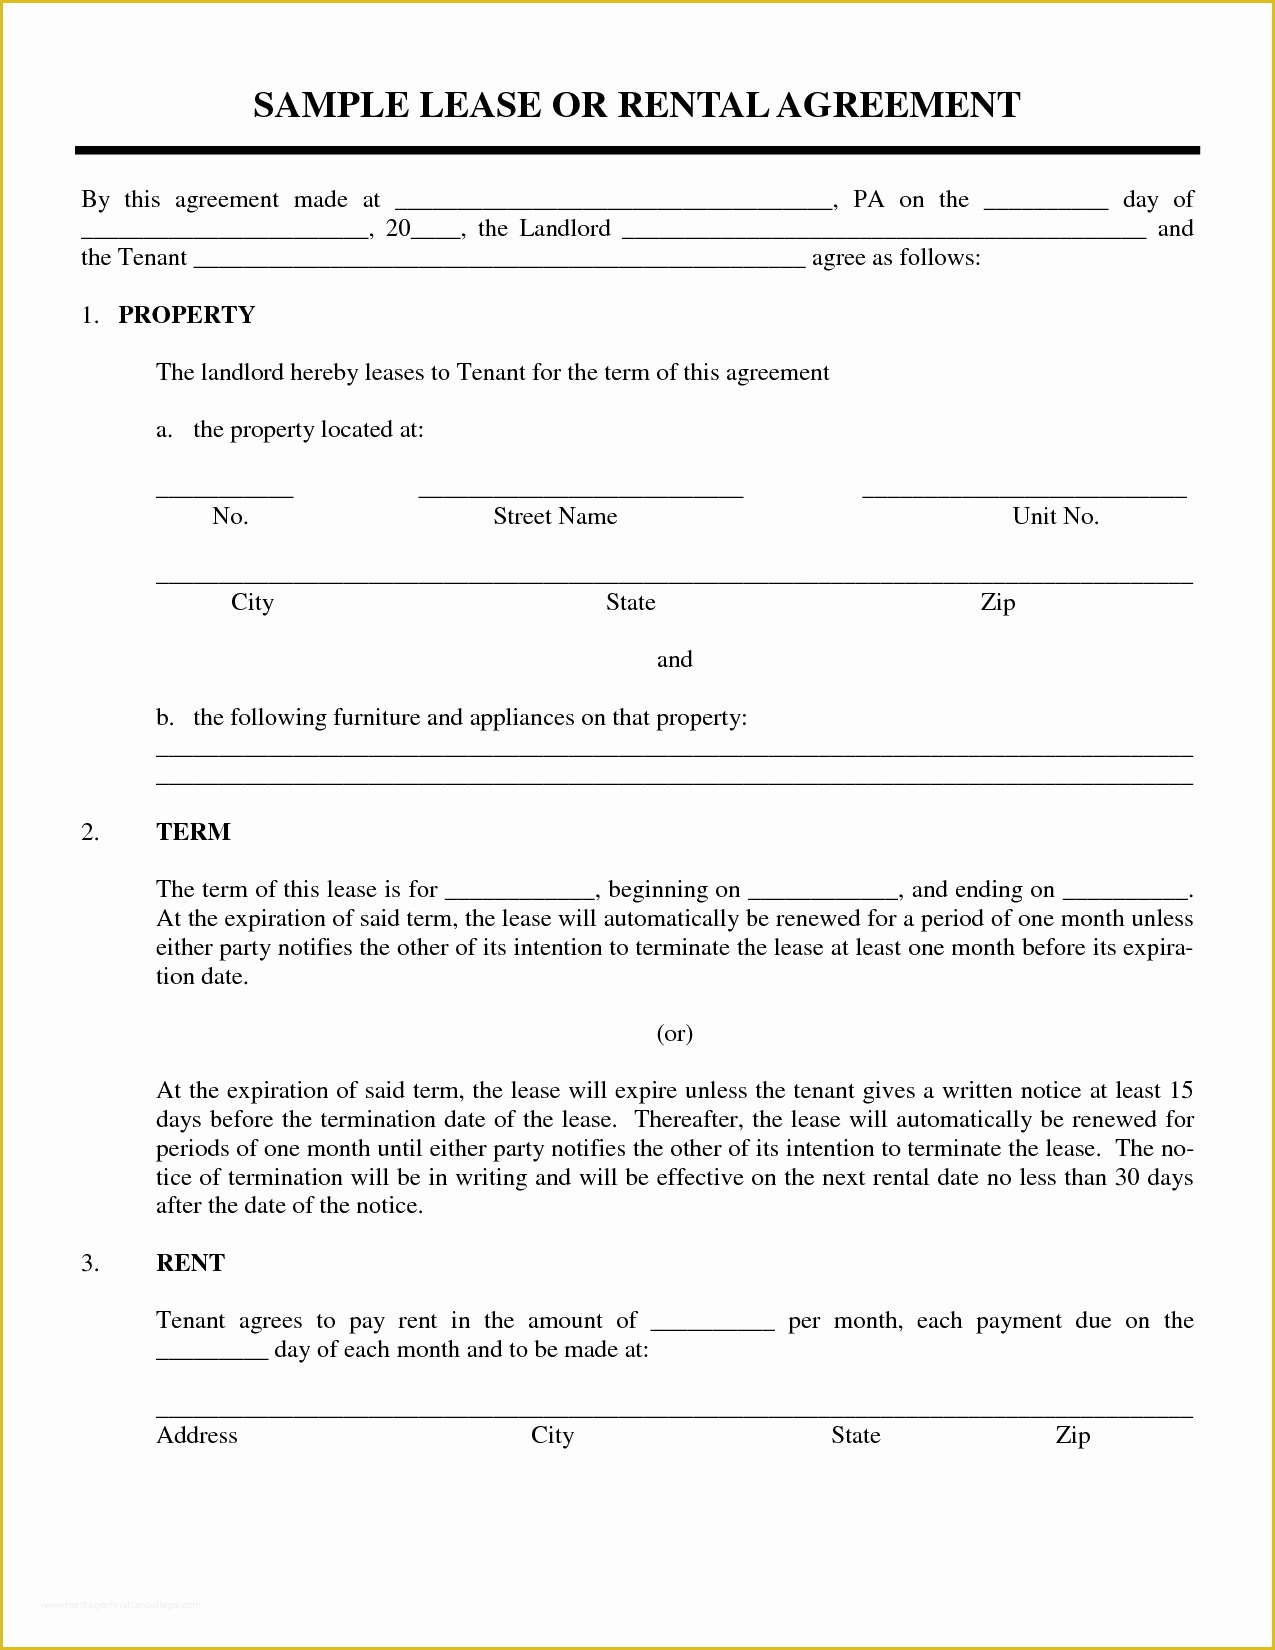 Free House Rental Lease Template Of Sample Lease or Rental Agreement